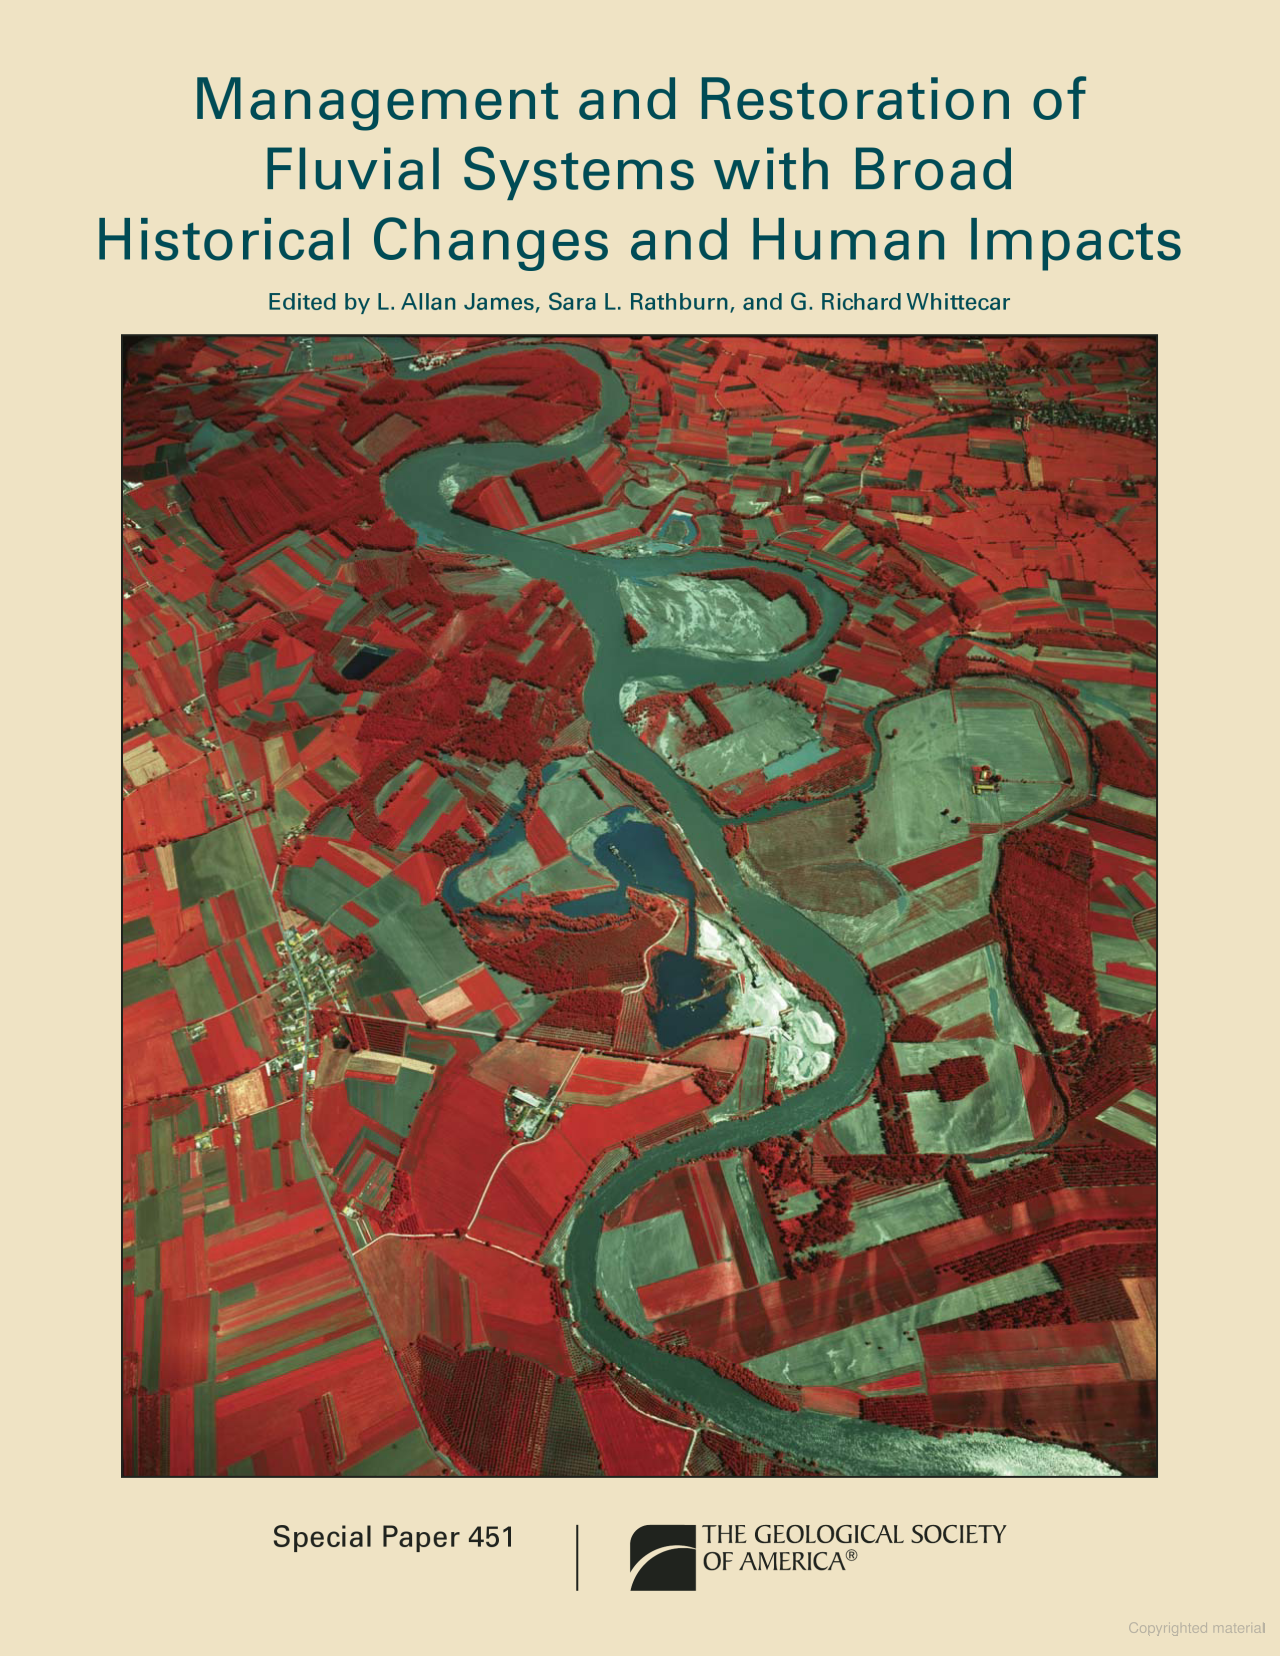 Management and Restoration of Fluvial Systems with Broad Historical Changes and Human Impacts